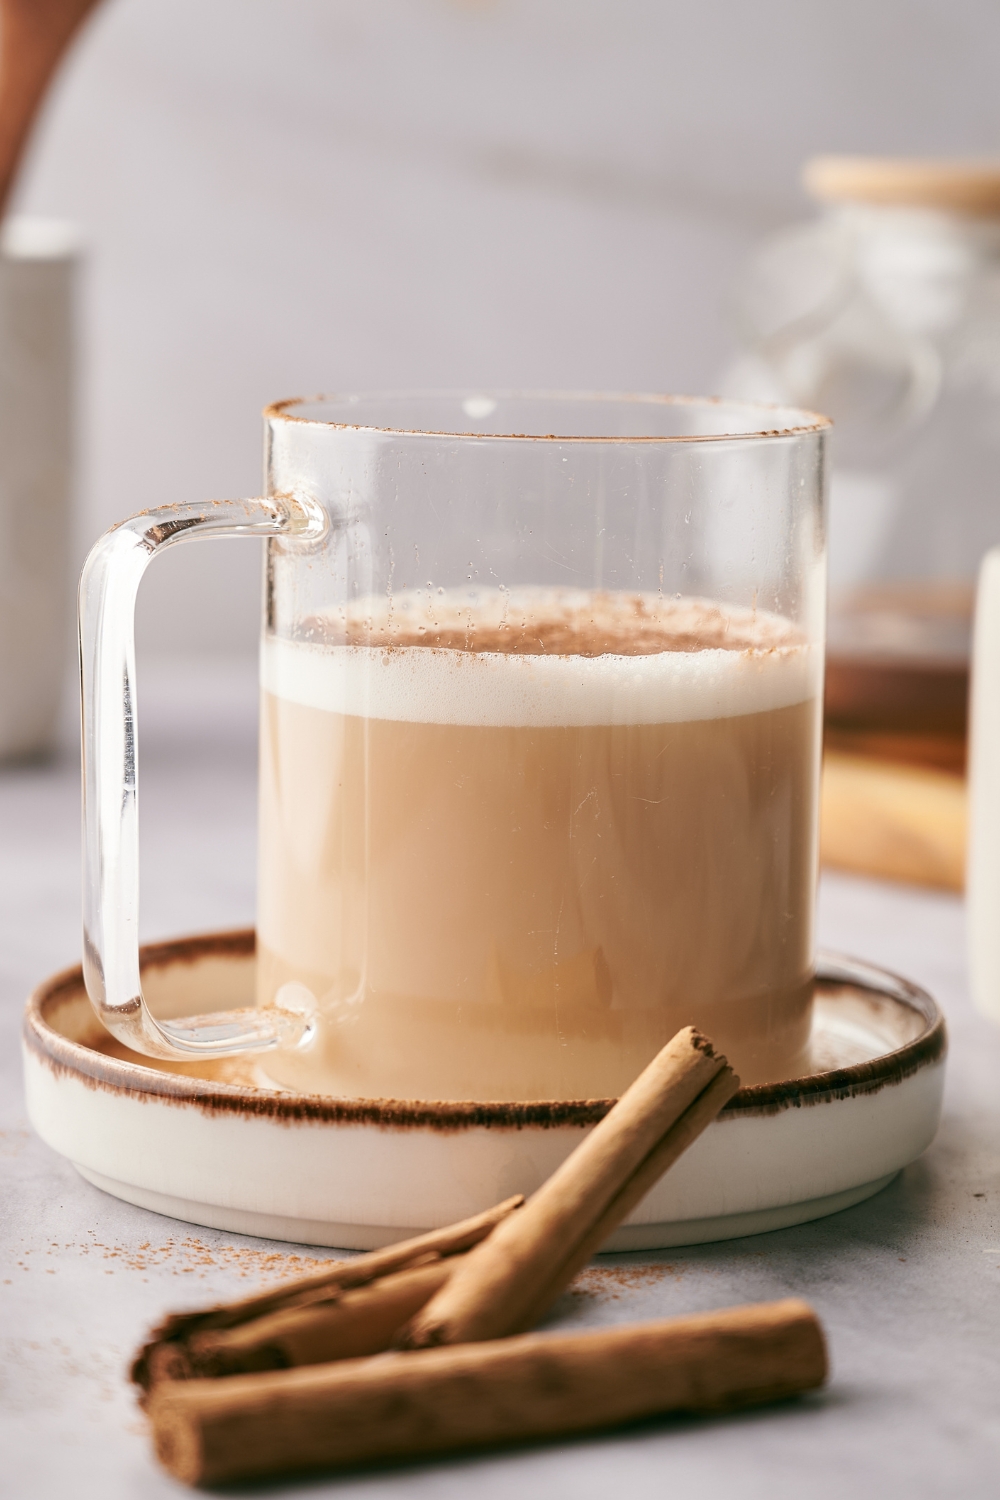 A glass that is filled with a chai tea latte. There are cinnamon sticks in front of the latte.